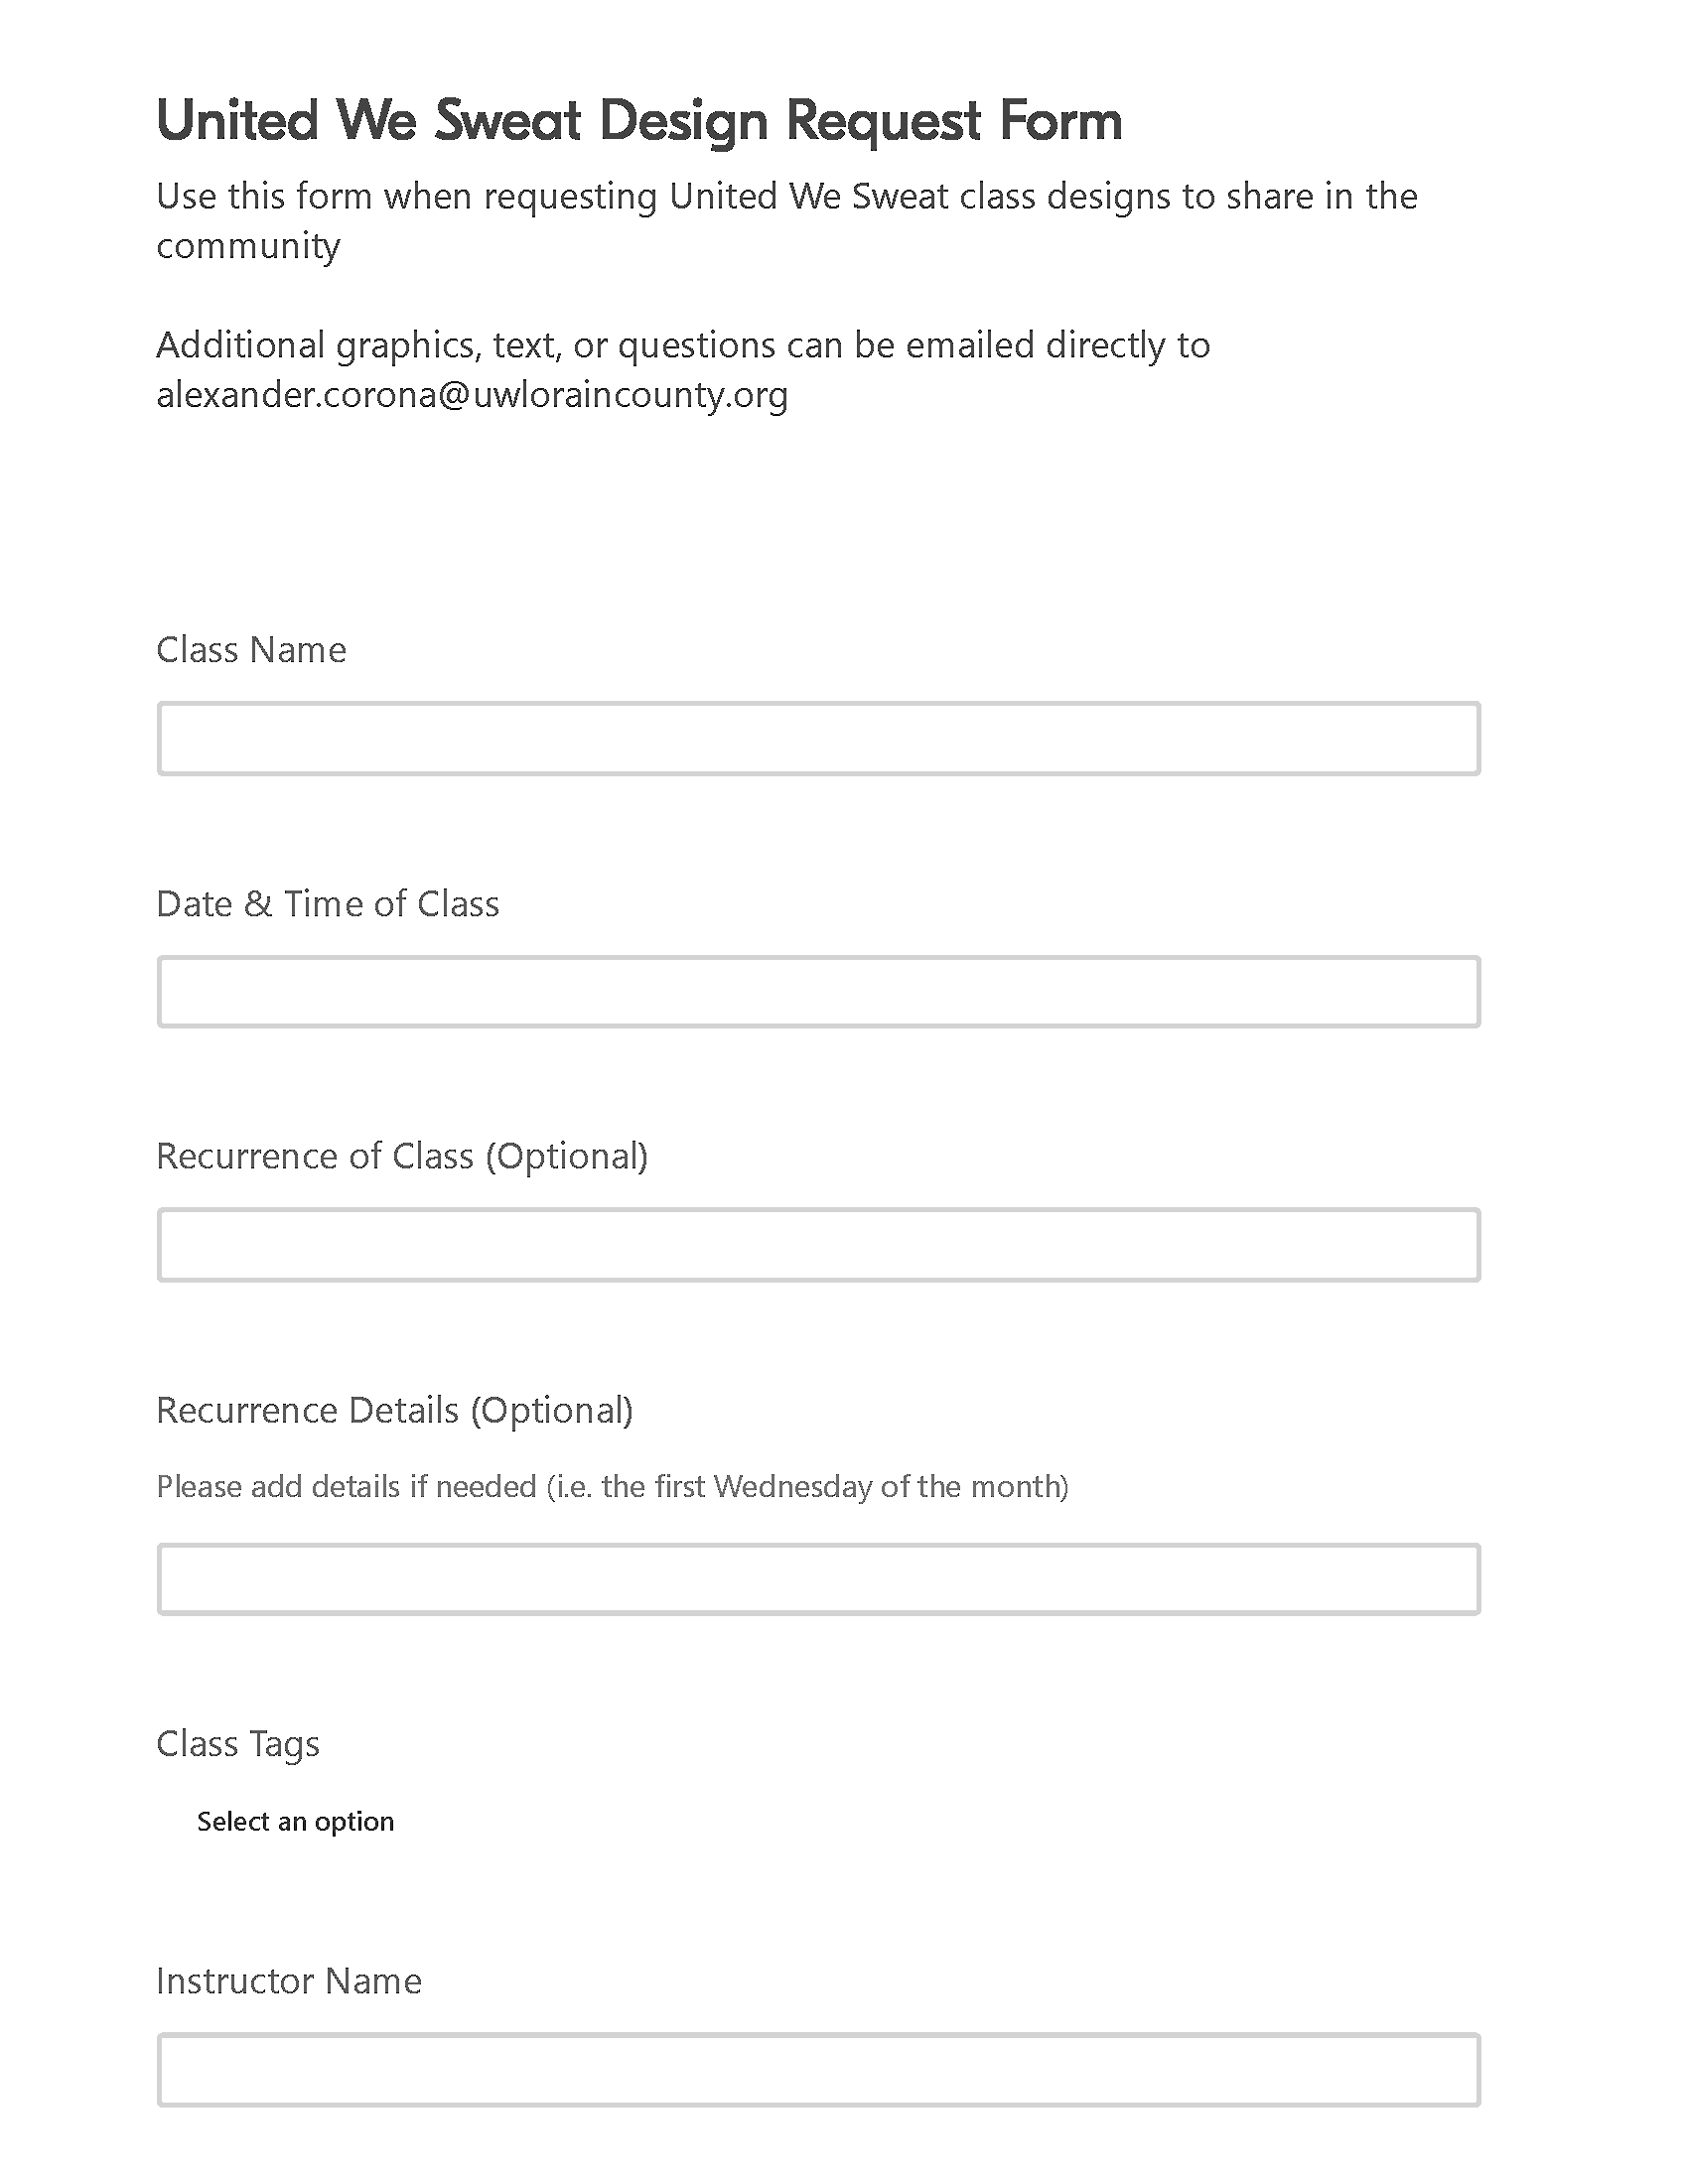 A form to have a custom design created by the United Way team 